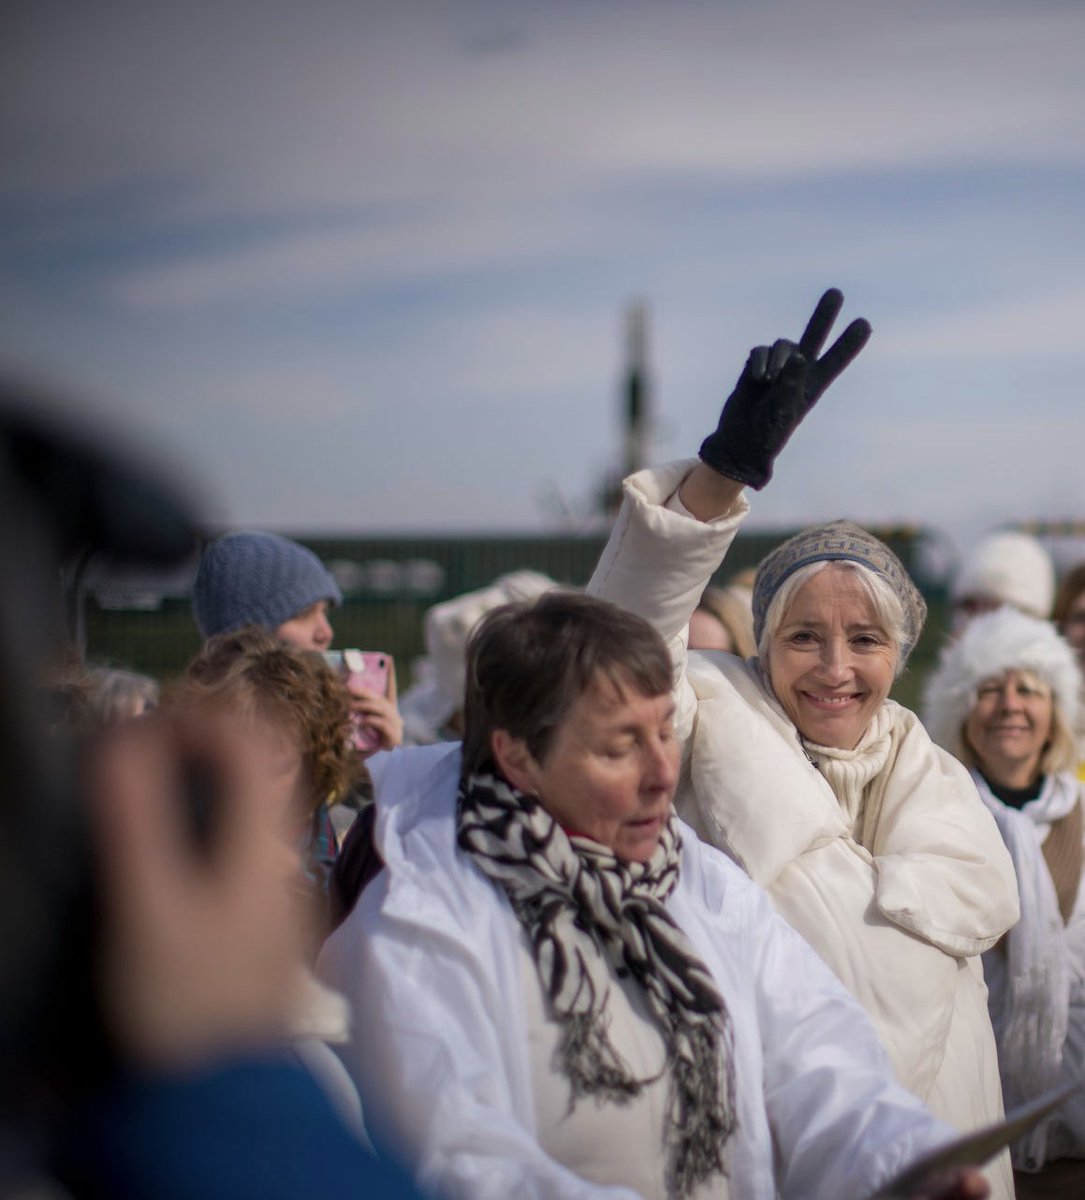 Emma Thompson joining a peaceful walk and silent protest at a controversial fracking site.